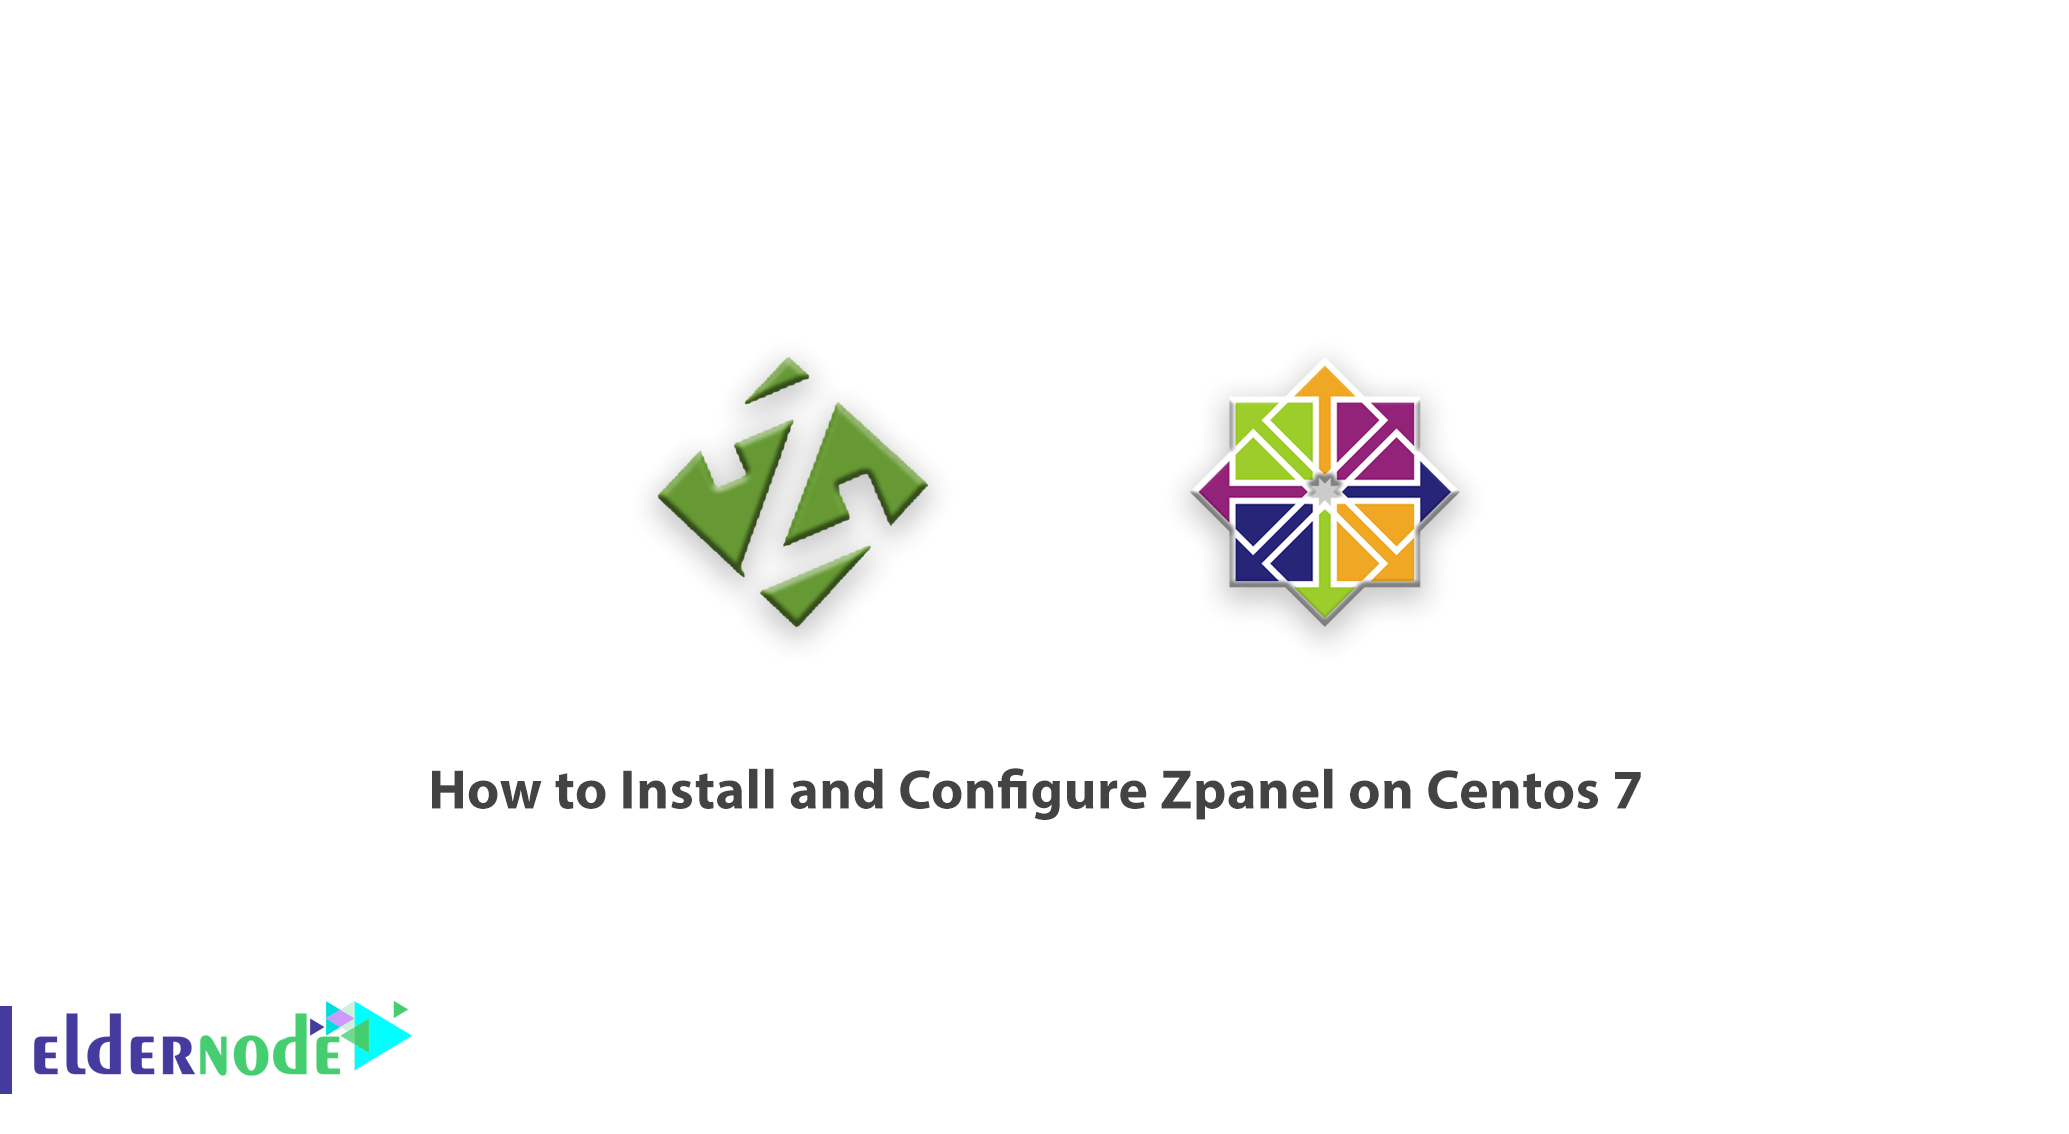 How to Install and Configure Zpanel on Centos 7